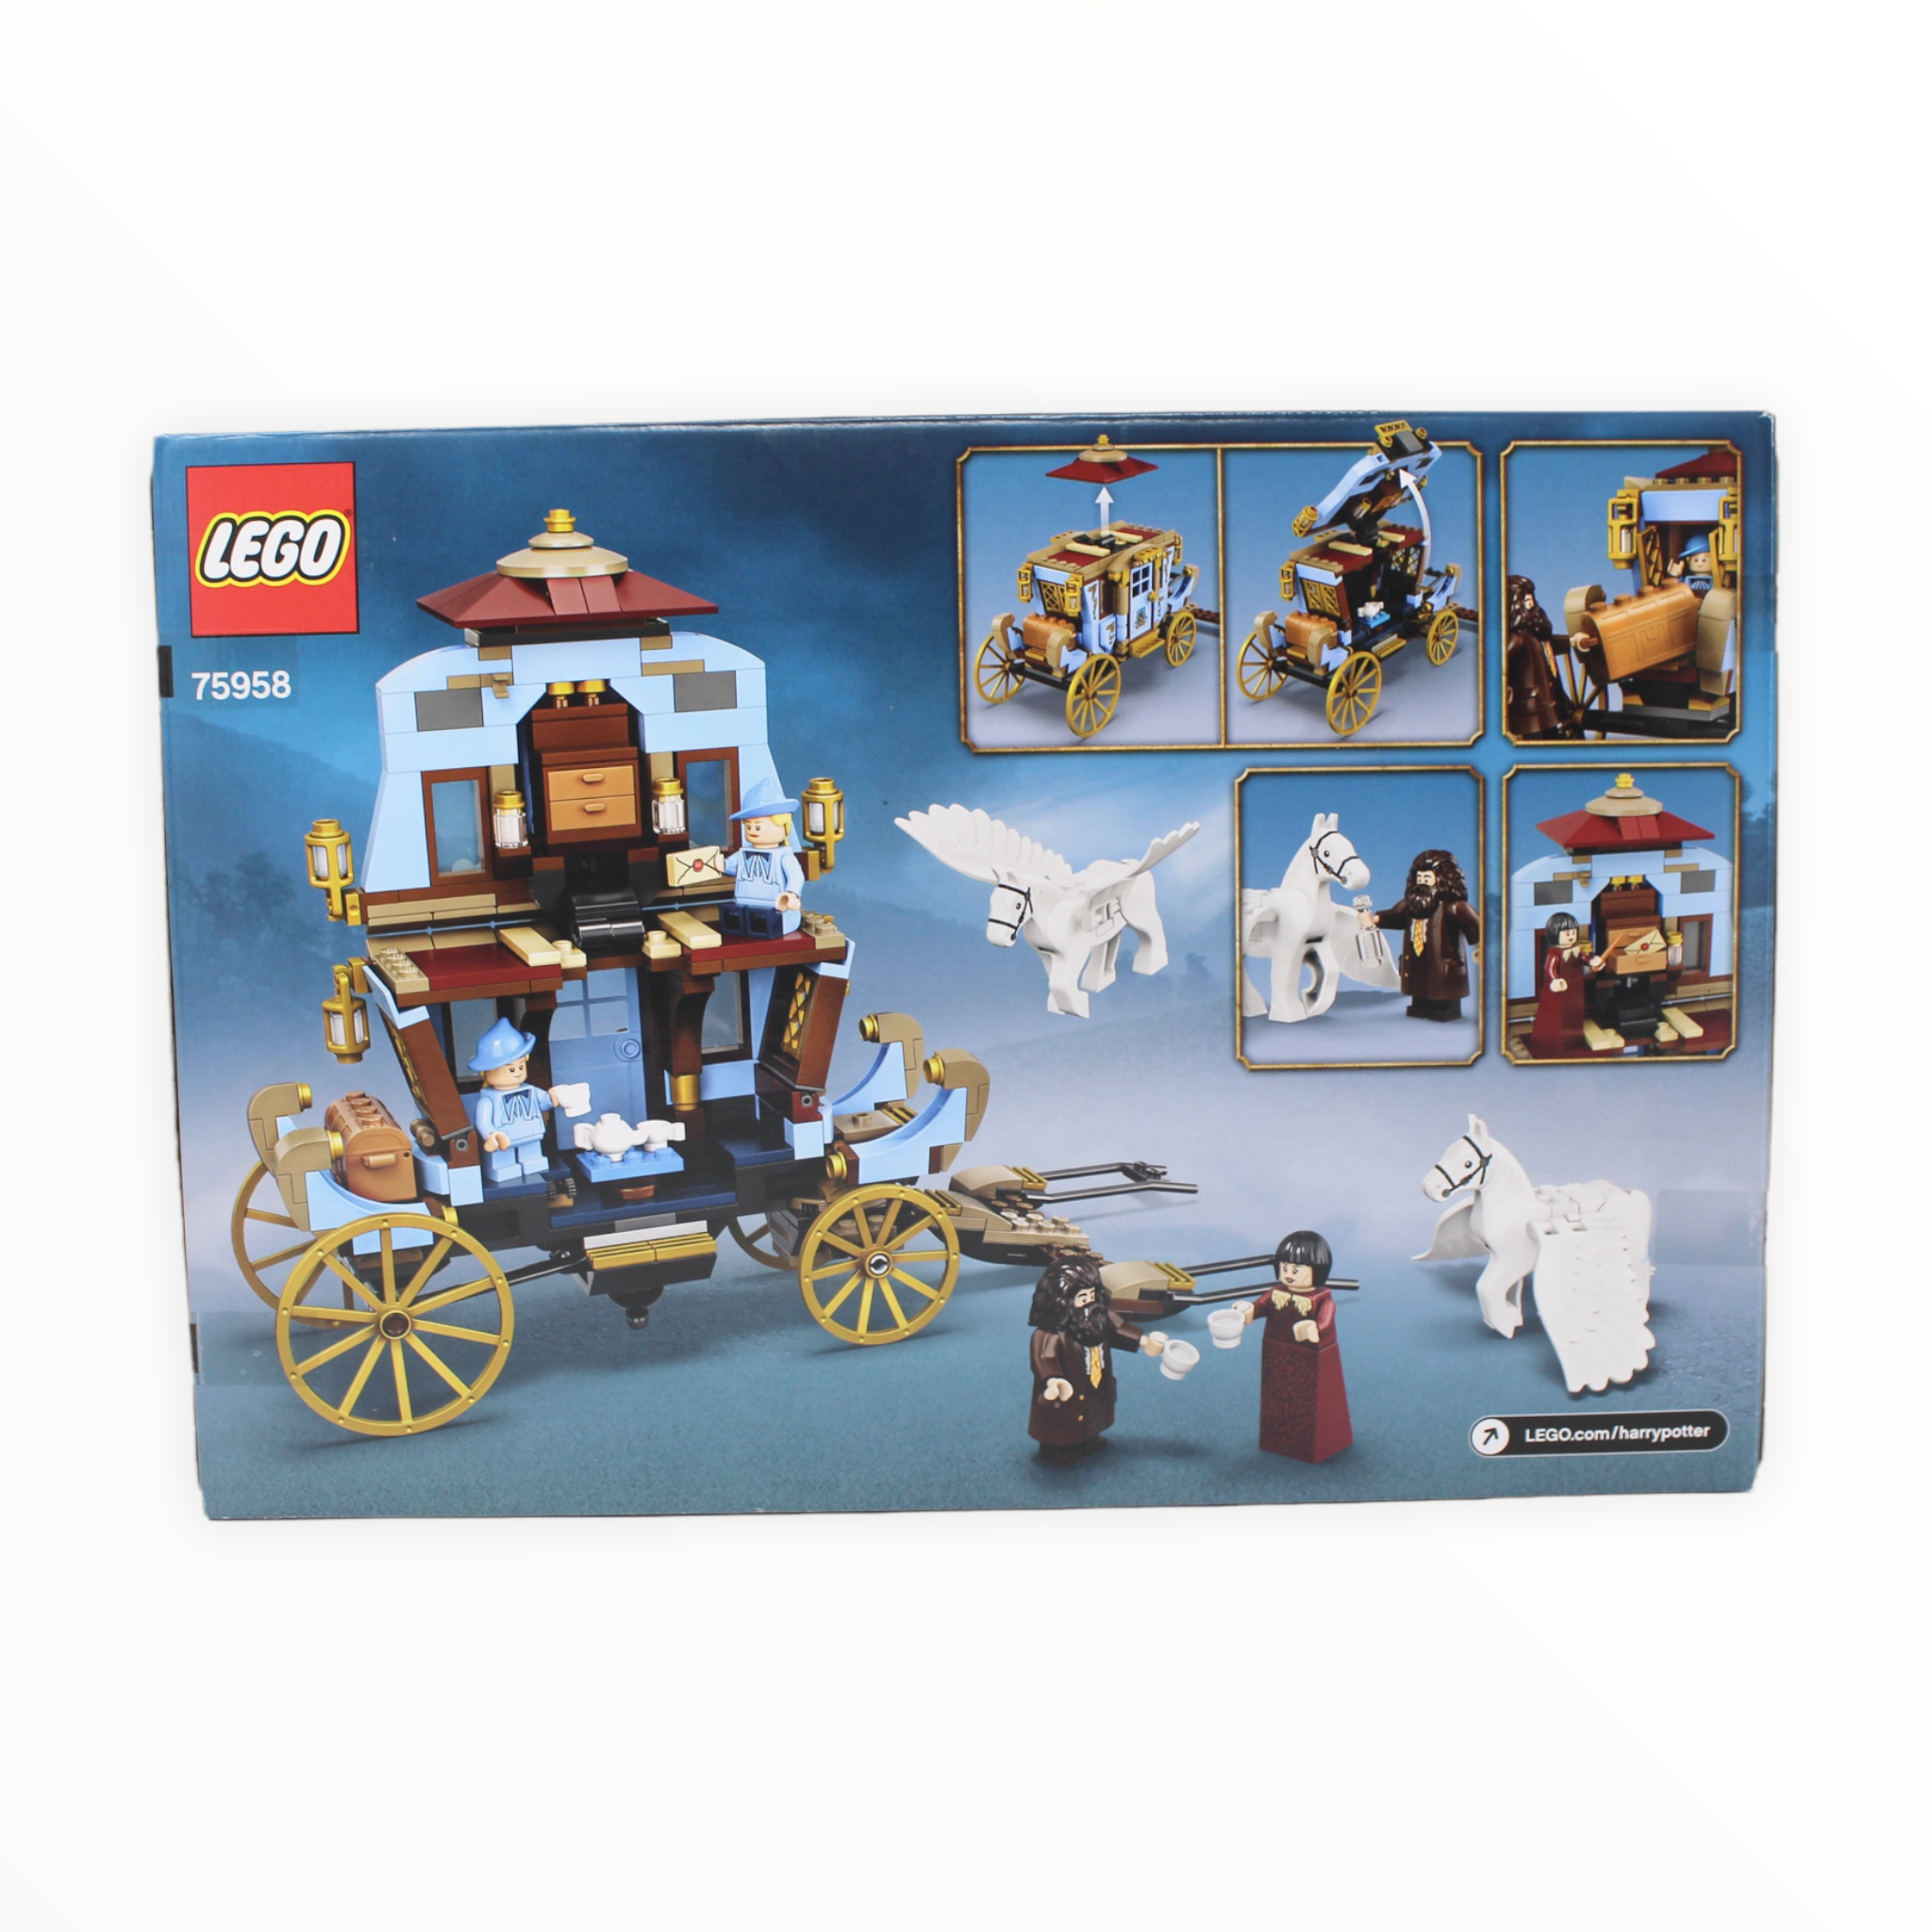 Retired Set 75958 Harry Potter Beauxbatons Carriage: Arrival at Hogwarts